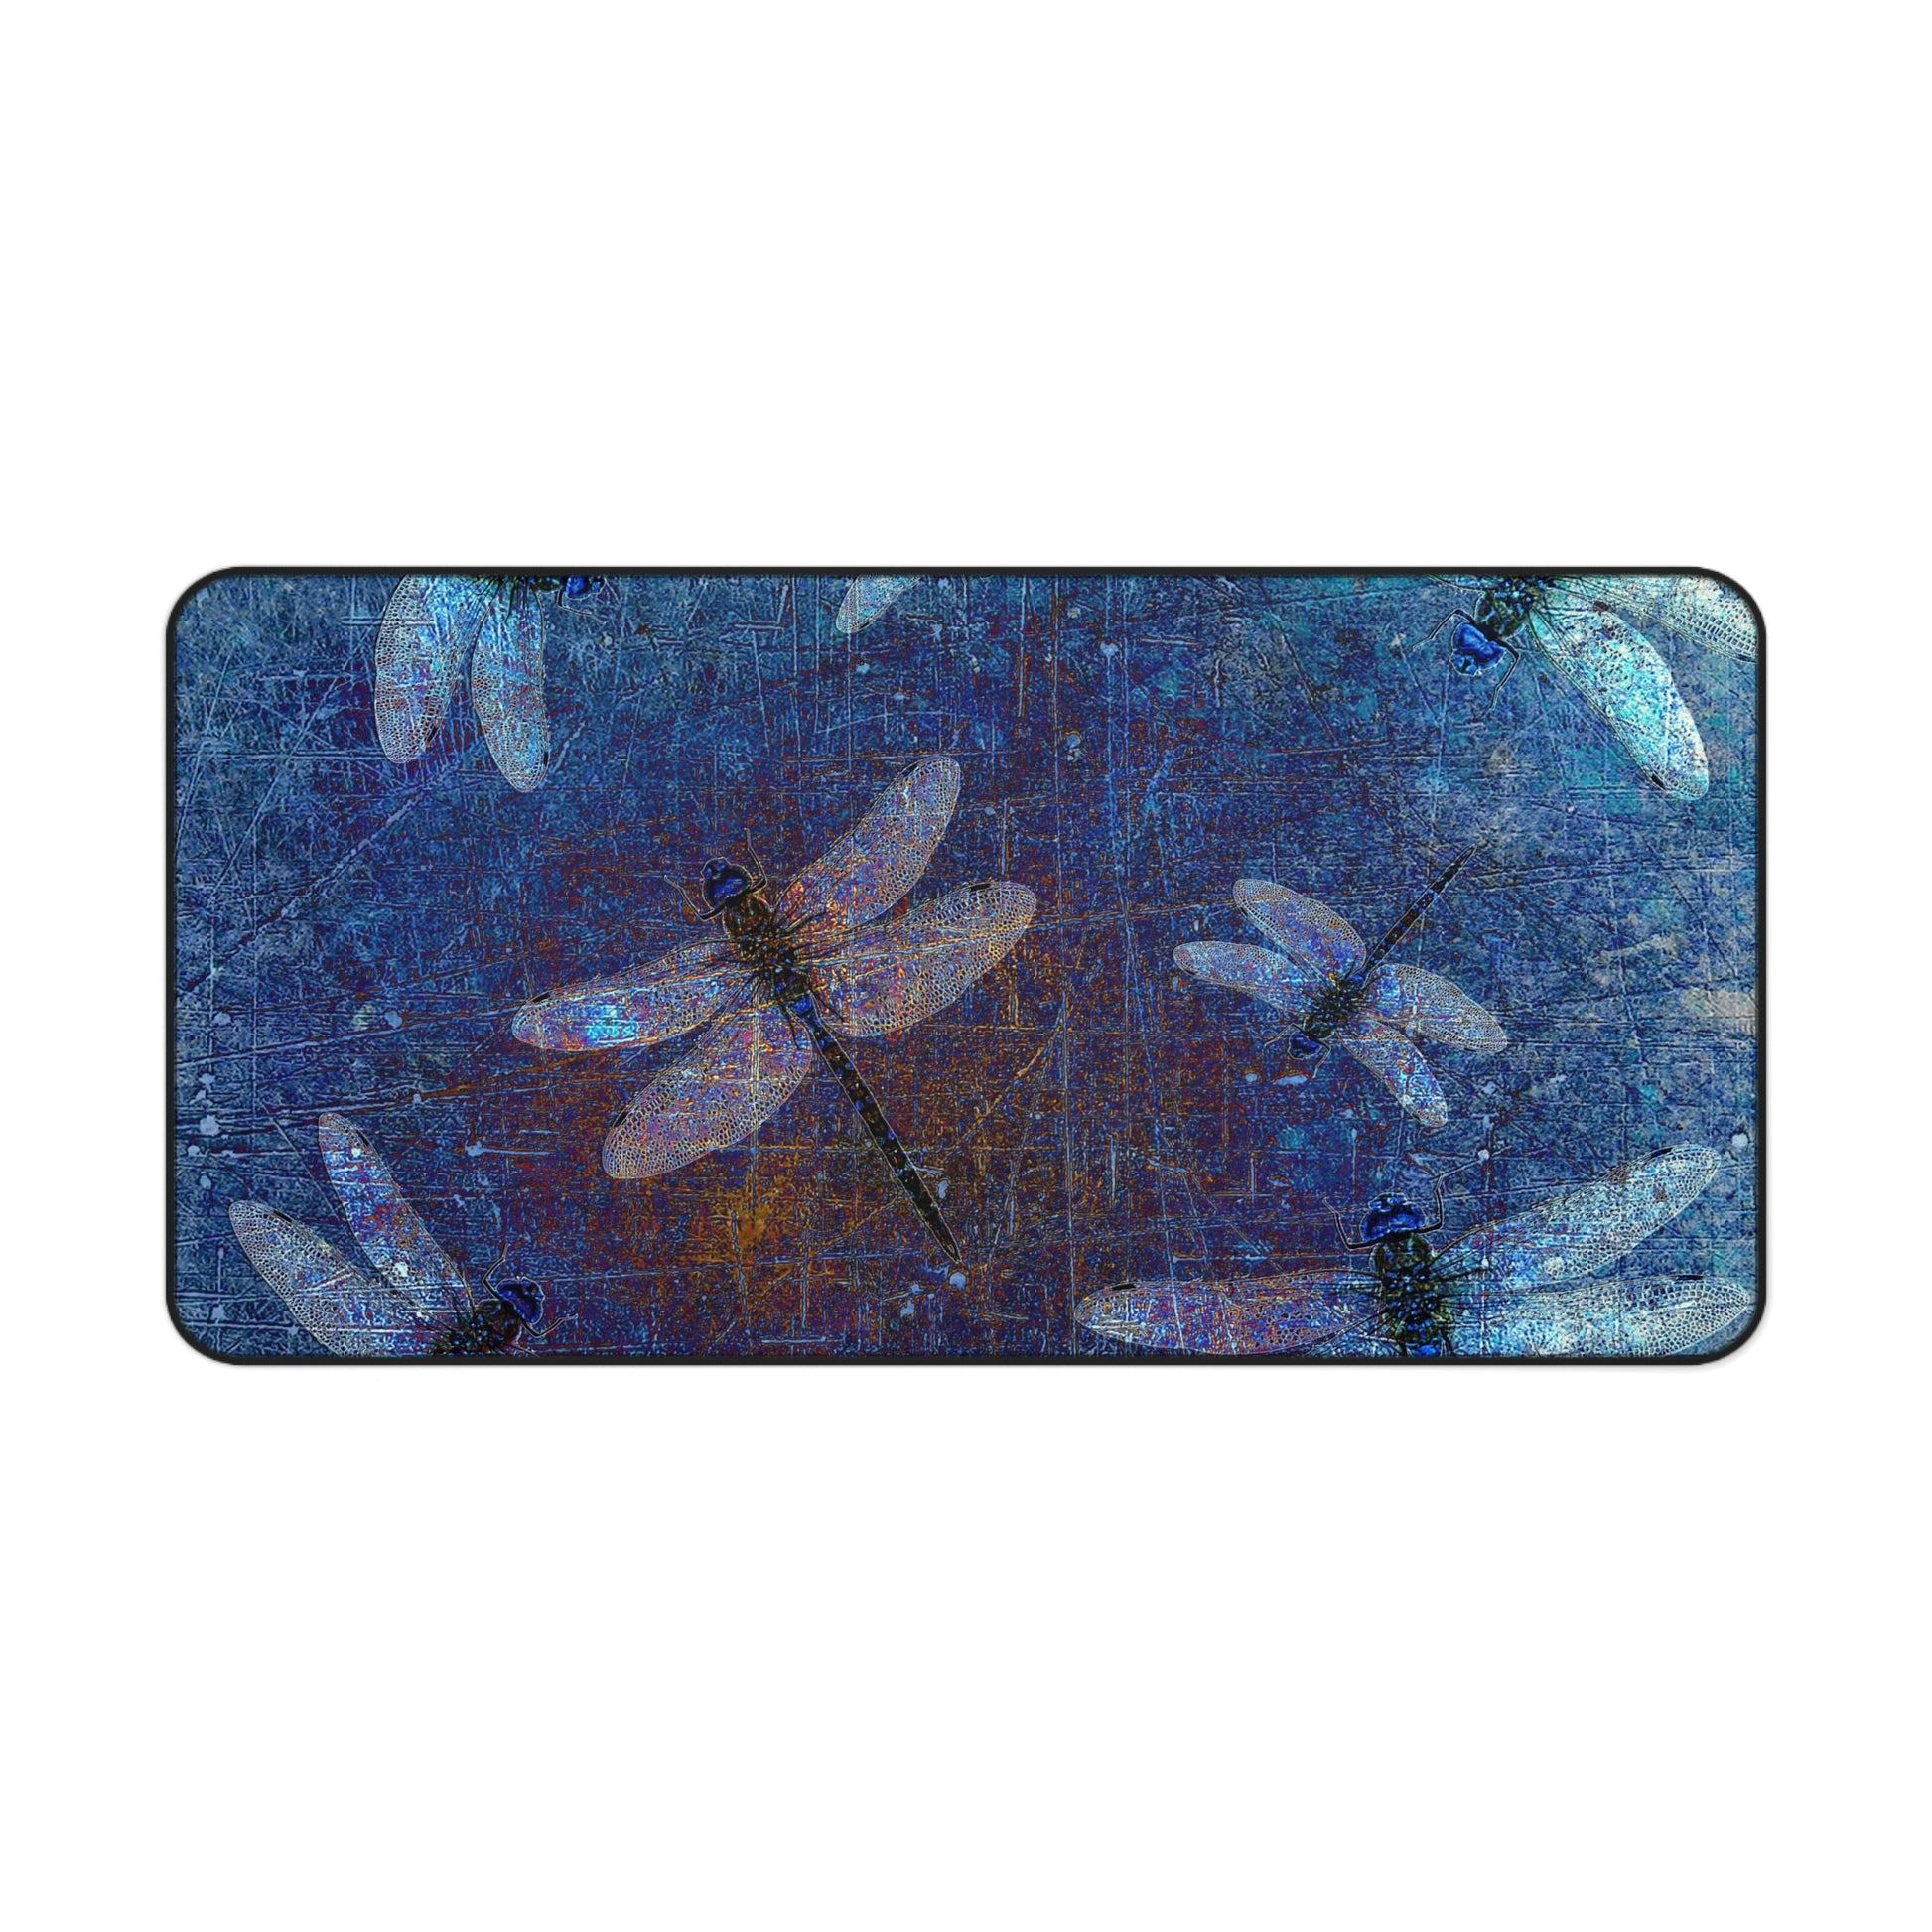 Dragonfly Desk Accessories - Flight of Dragonflies on Distressed Blue Background 15.5 by 31